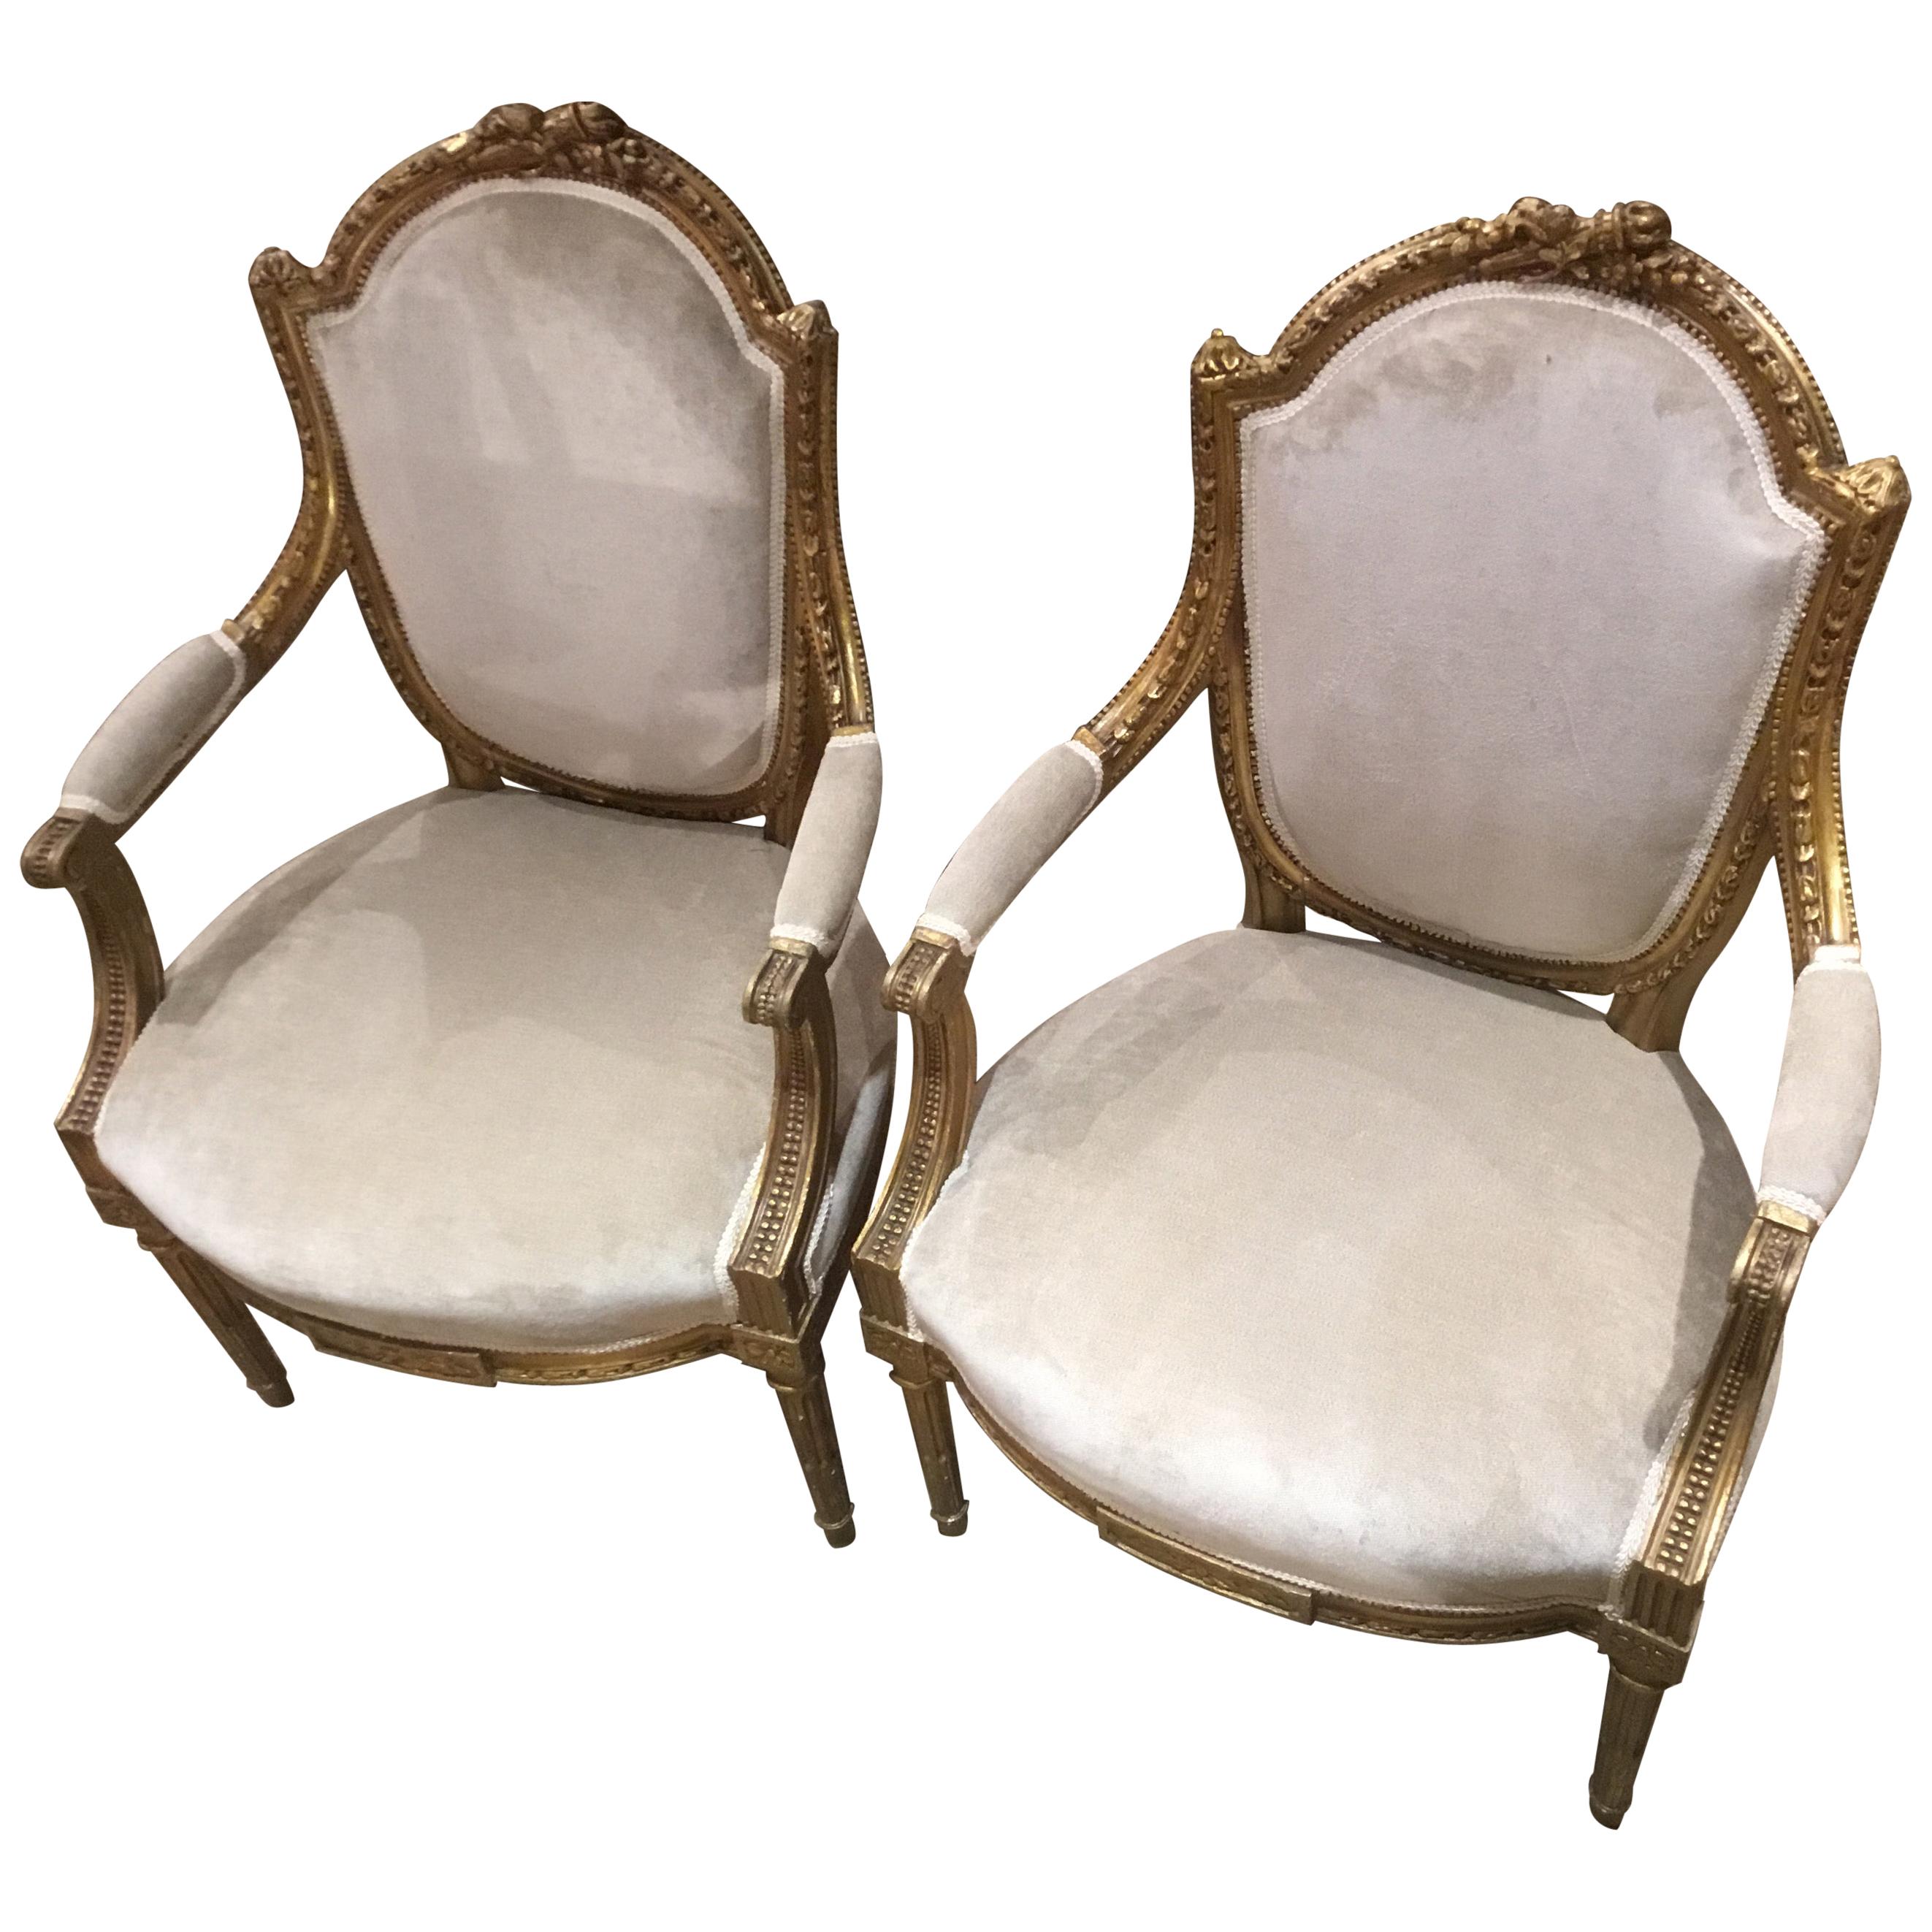 Pair of French Louis XVI Style Giltwood Chairs with New Cream Upholstery For Sale